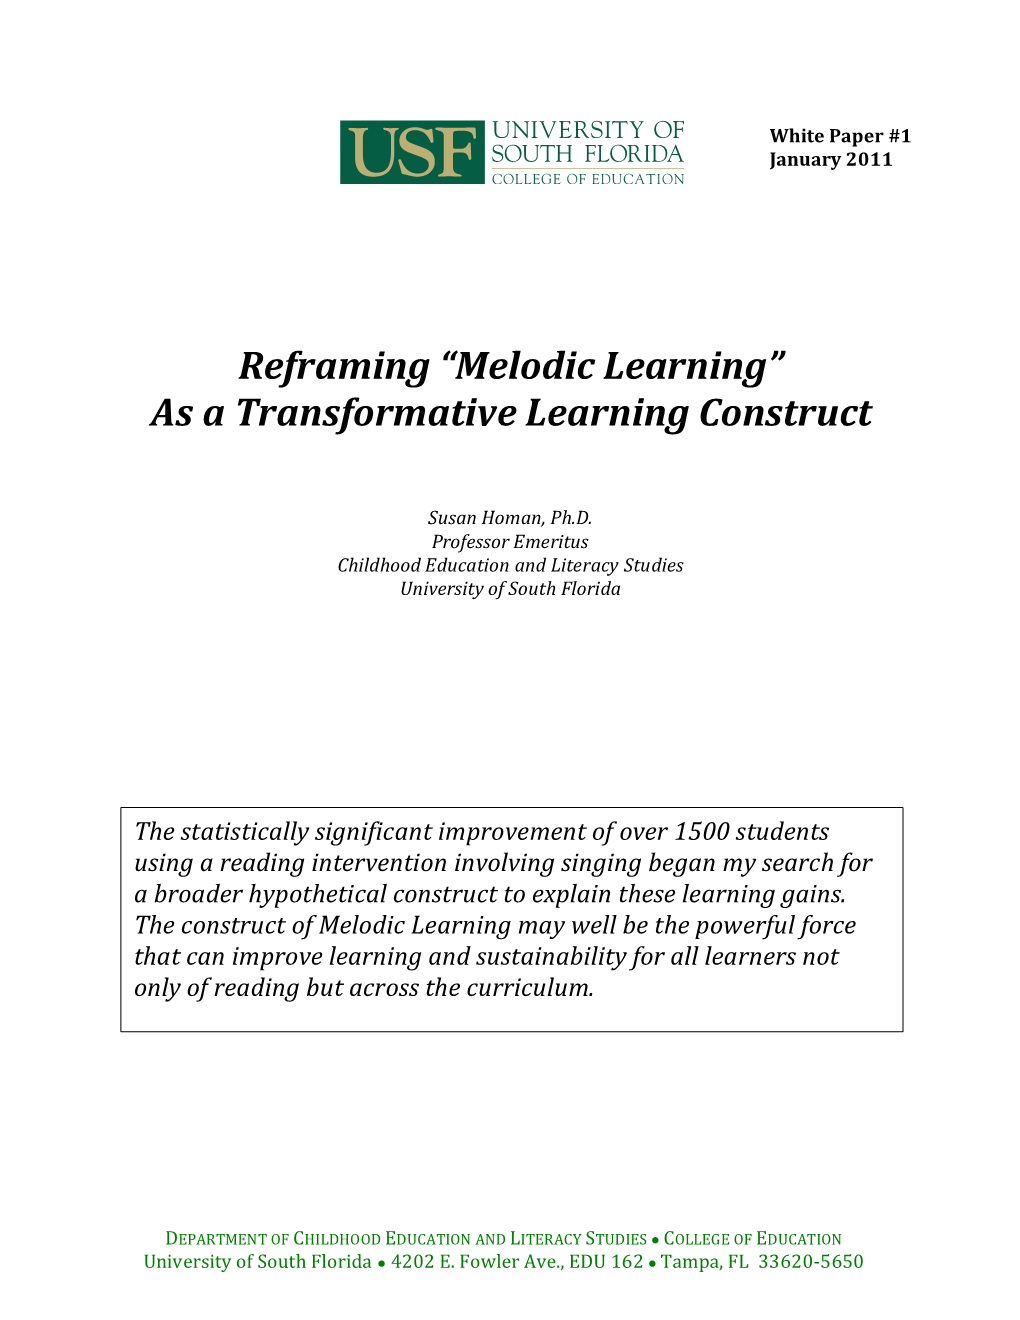 Reframing “Melodic Learning” As a Transformative Learning Construct